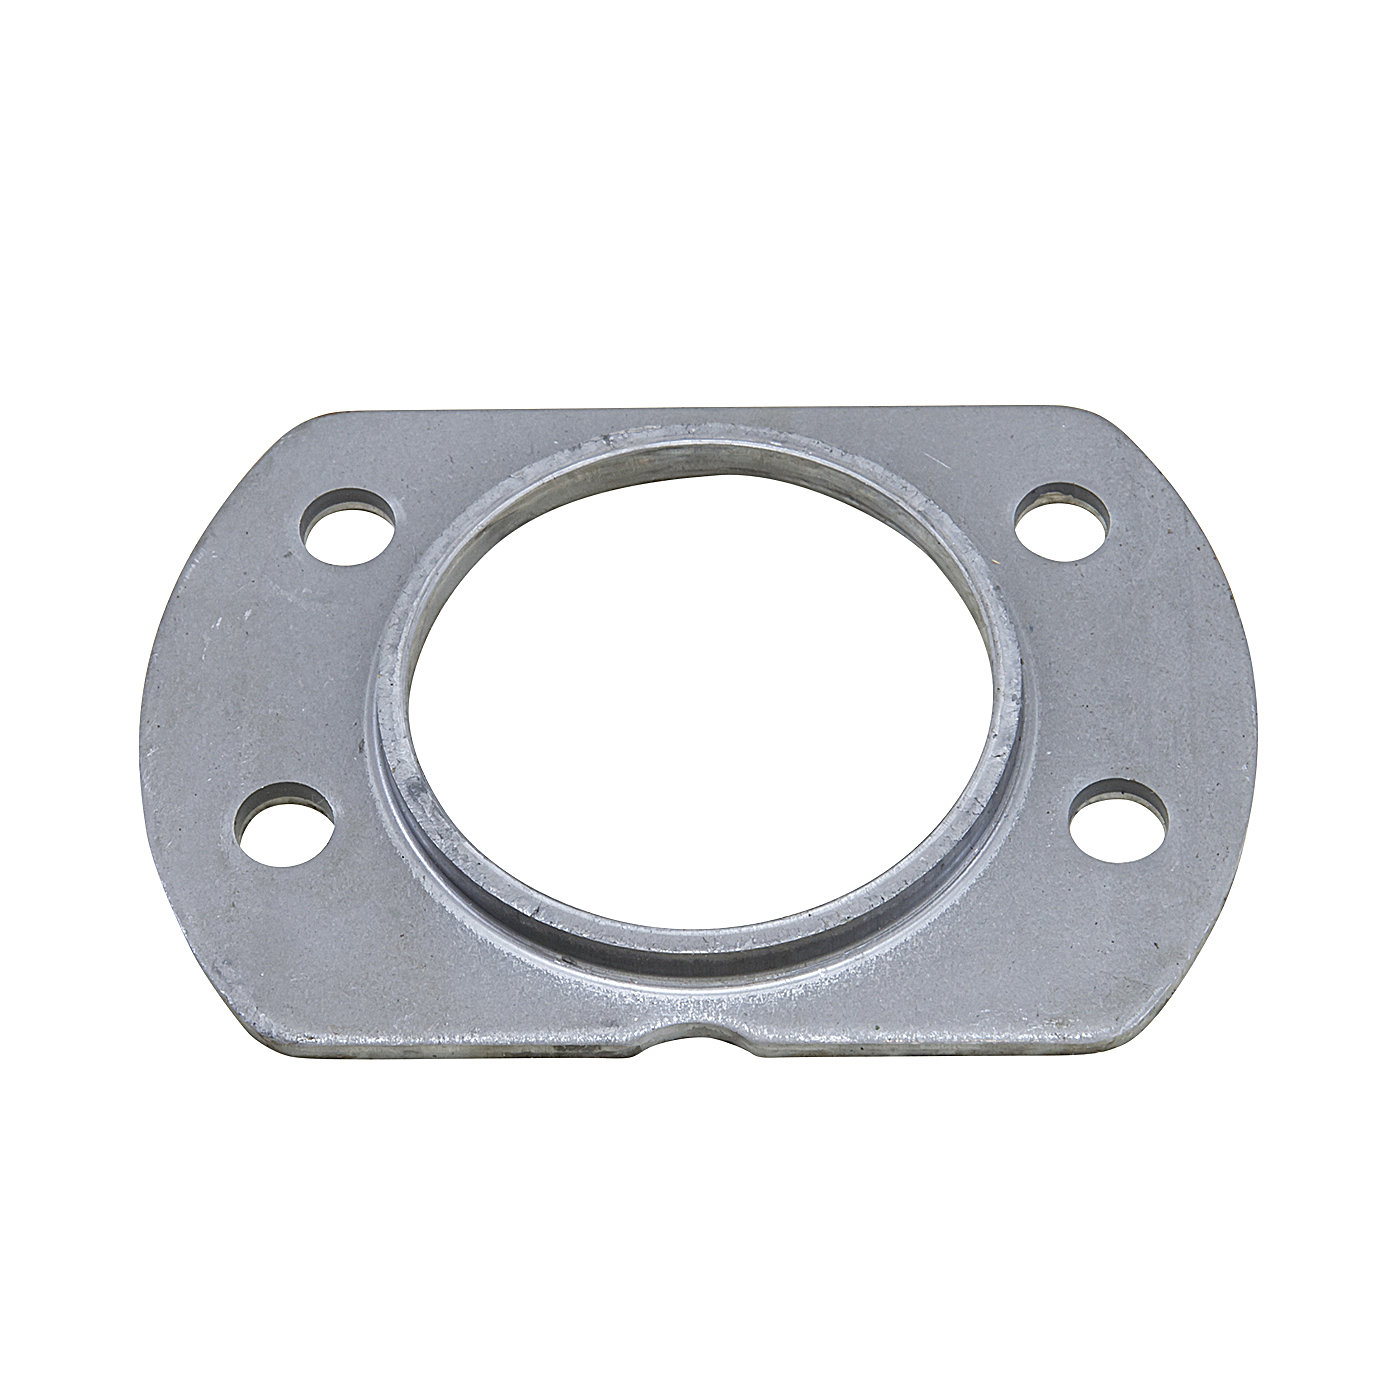 Yukon Gear & Axle YSPRET-013 Axle Bearing Retainer for 97-06 Jeep Wrangler  TJ and Unlimited with Dana 44 Axle | Quadratec